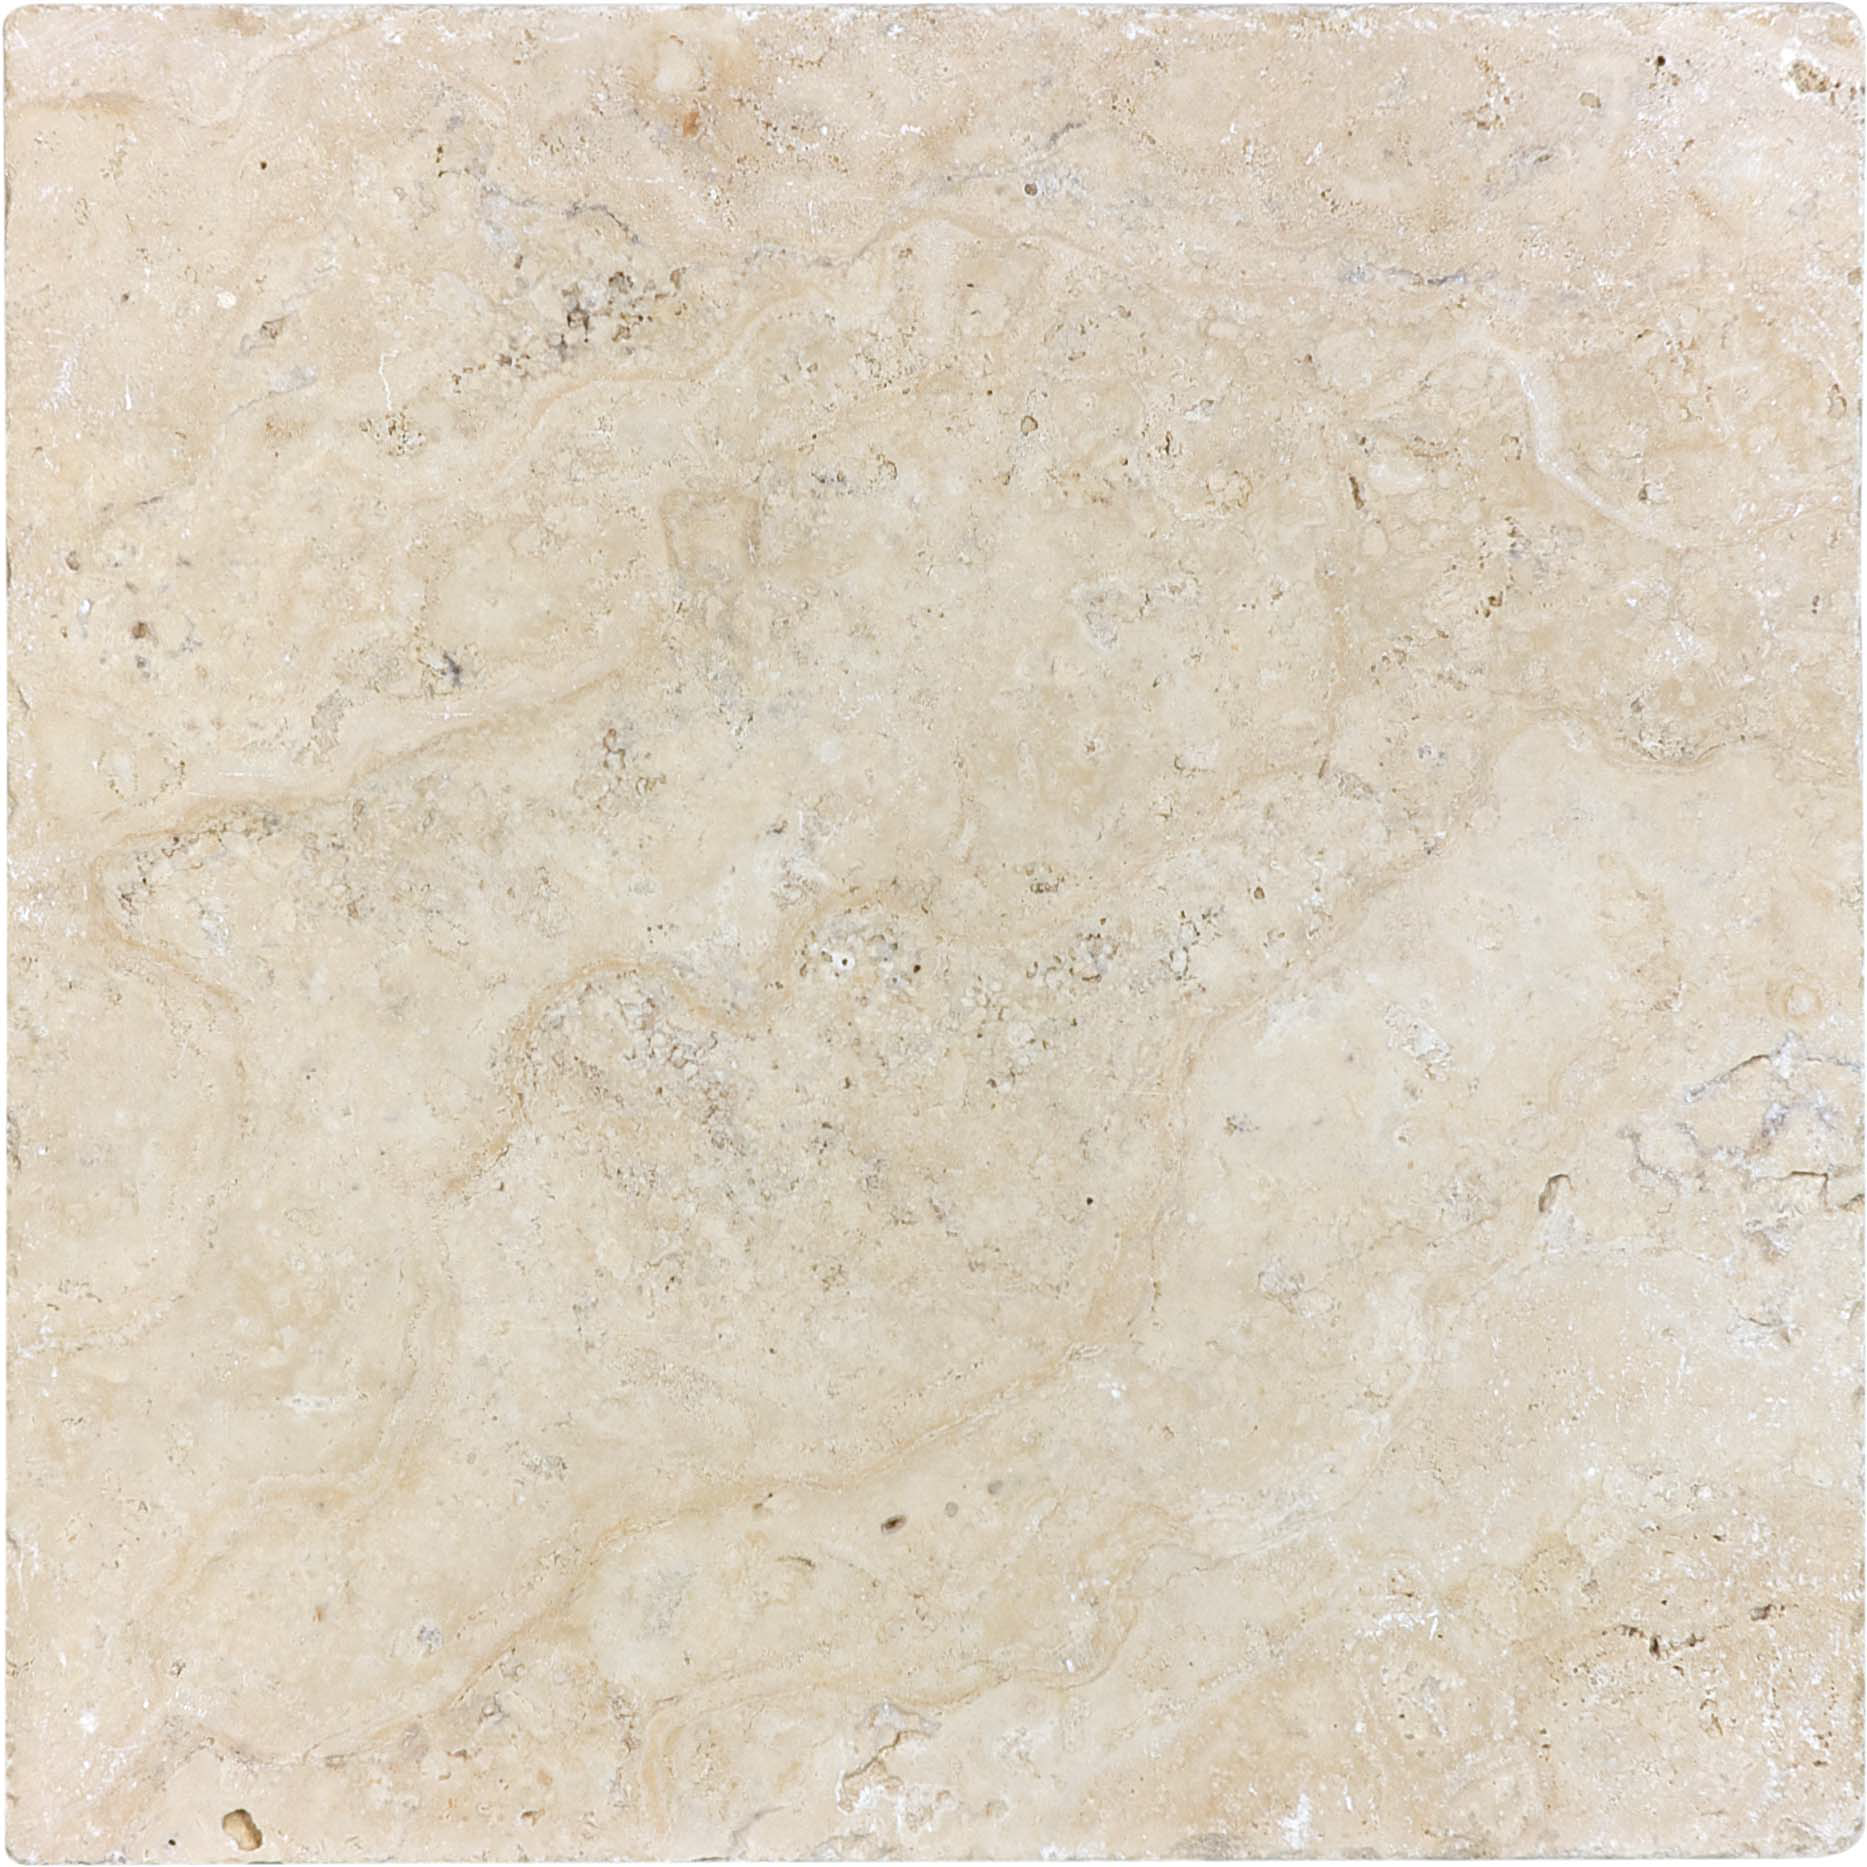 travertine pattern natural stone field tile from picasso anatolia collection distributed by surface group international tumbled finish tumbled edge 12x12 square shape